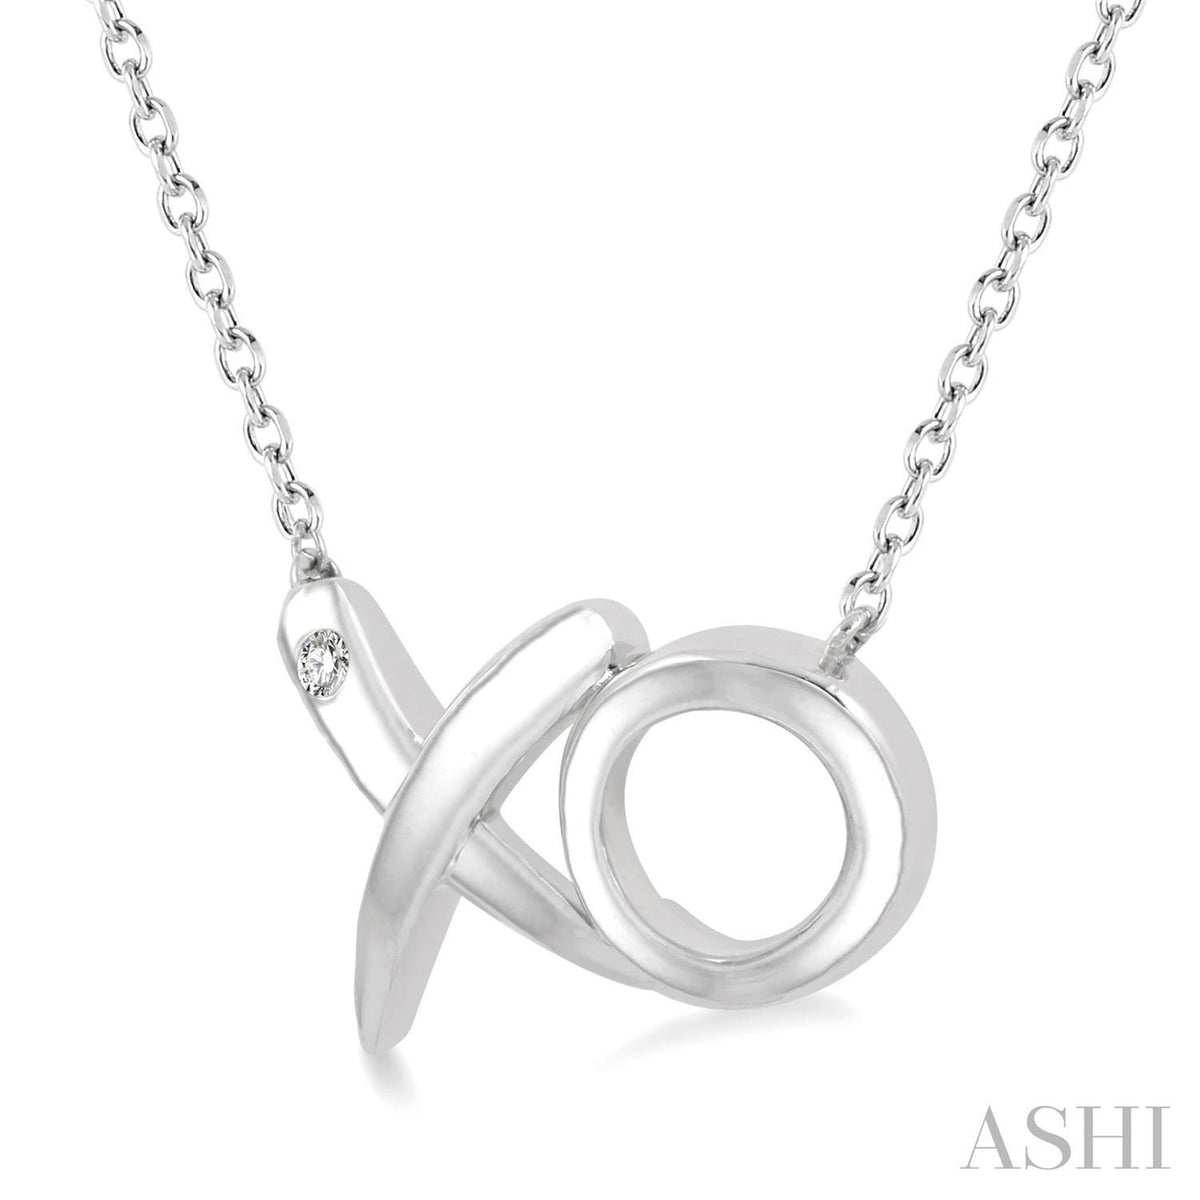 Sterling Silver Contemporary X and O Pendant